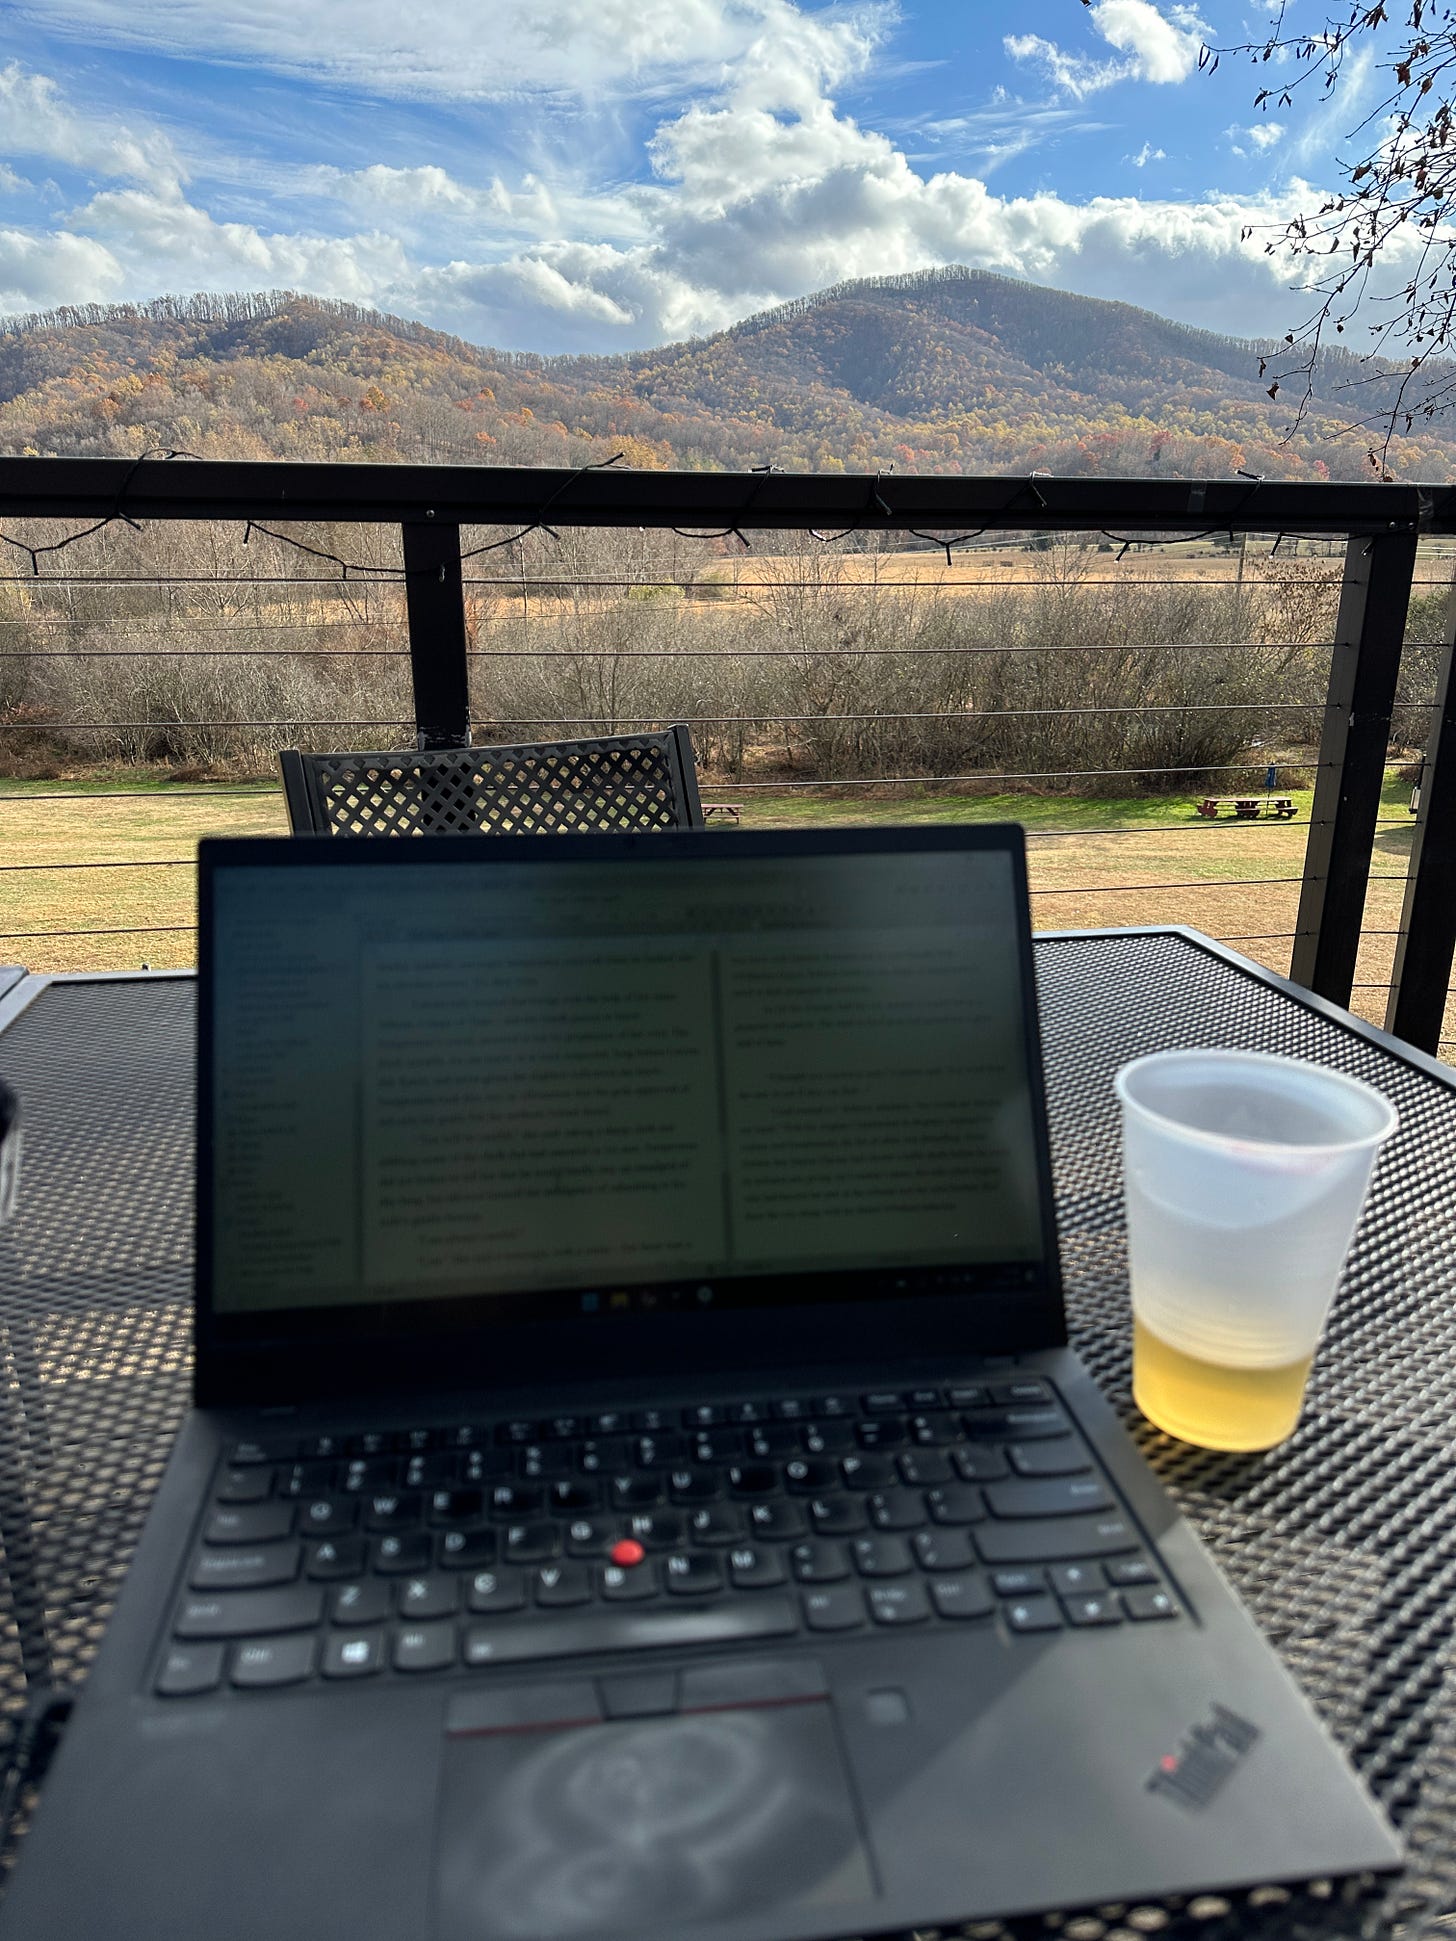 A laptop and a cup of cider on an iron-wrought table, a gorgoeous view of mountains and a cloud-streaked sky in the background